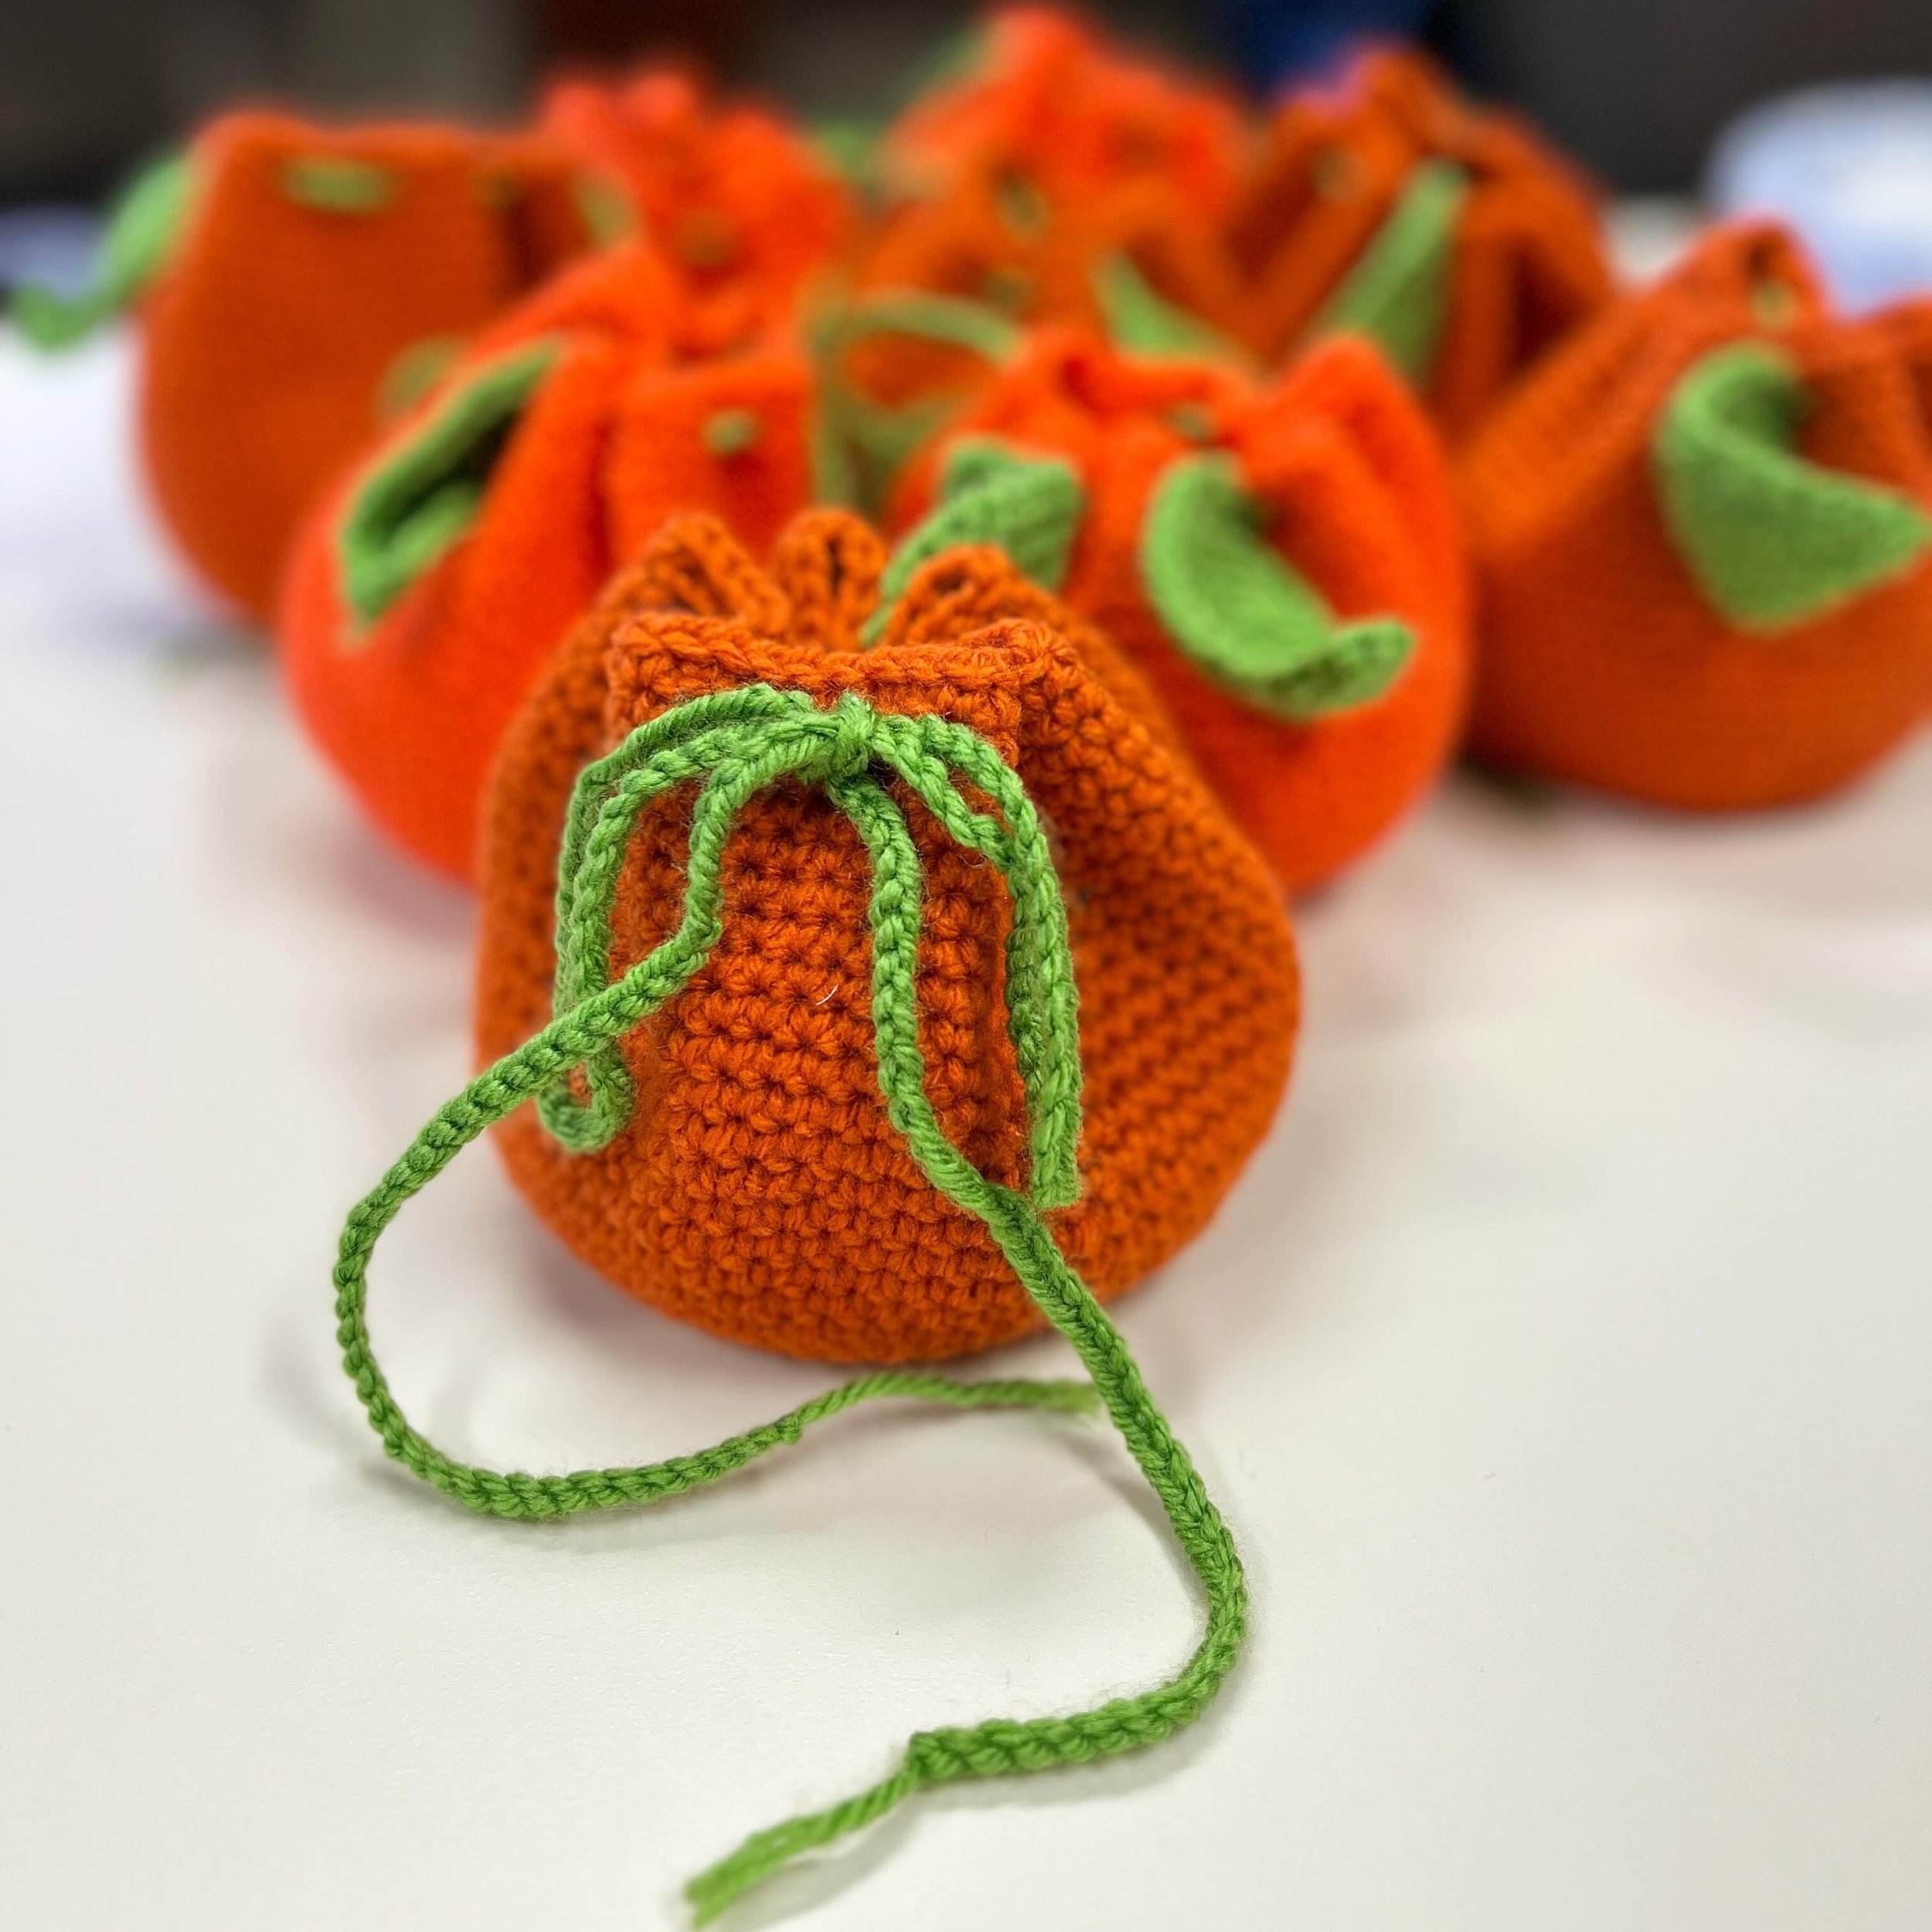 🍊We made it to the end of the academic year! 🎓🍊 
Congrats to all the grads out there!!
.
Made some orange pouches for our student team for a year of hard work. Go Orange! 
.
#Handmade #Crochet #Orange #OldLadyStatus